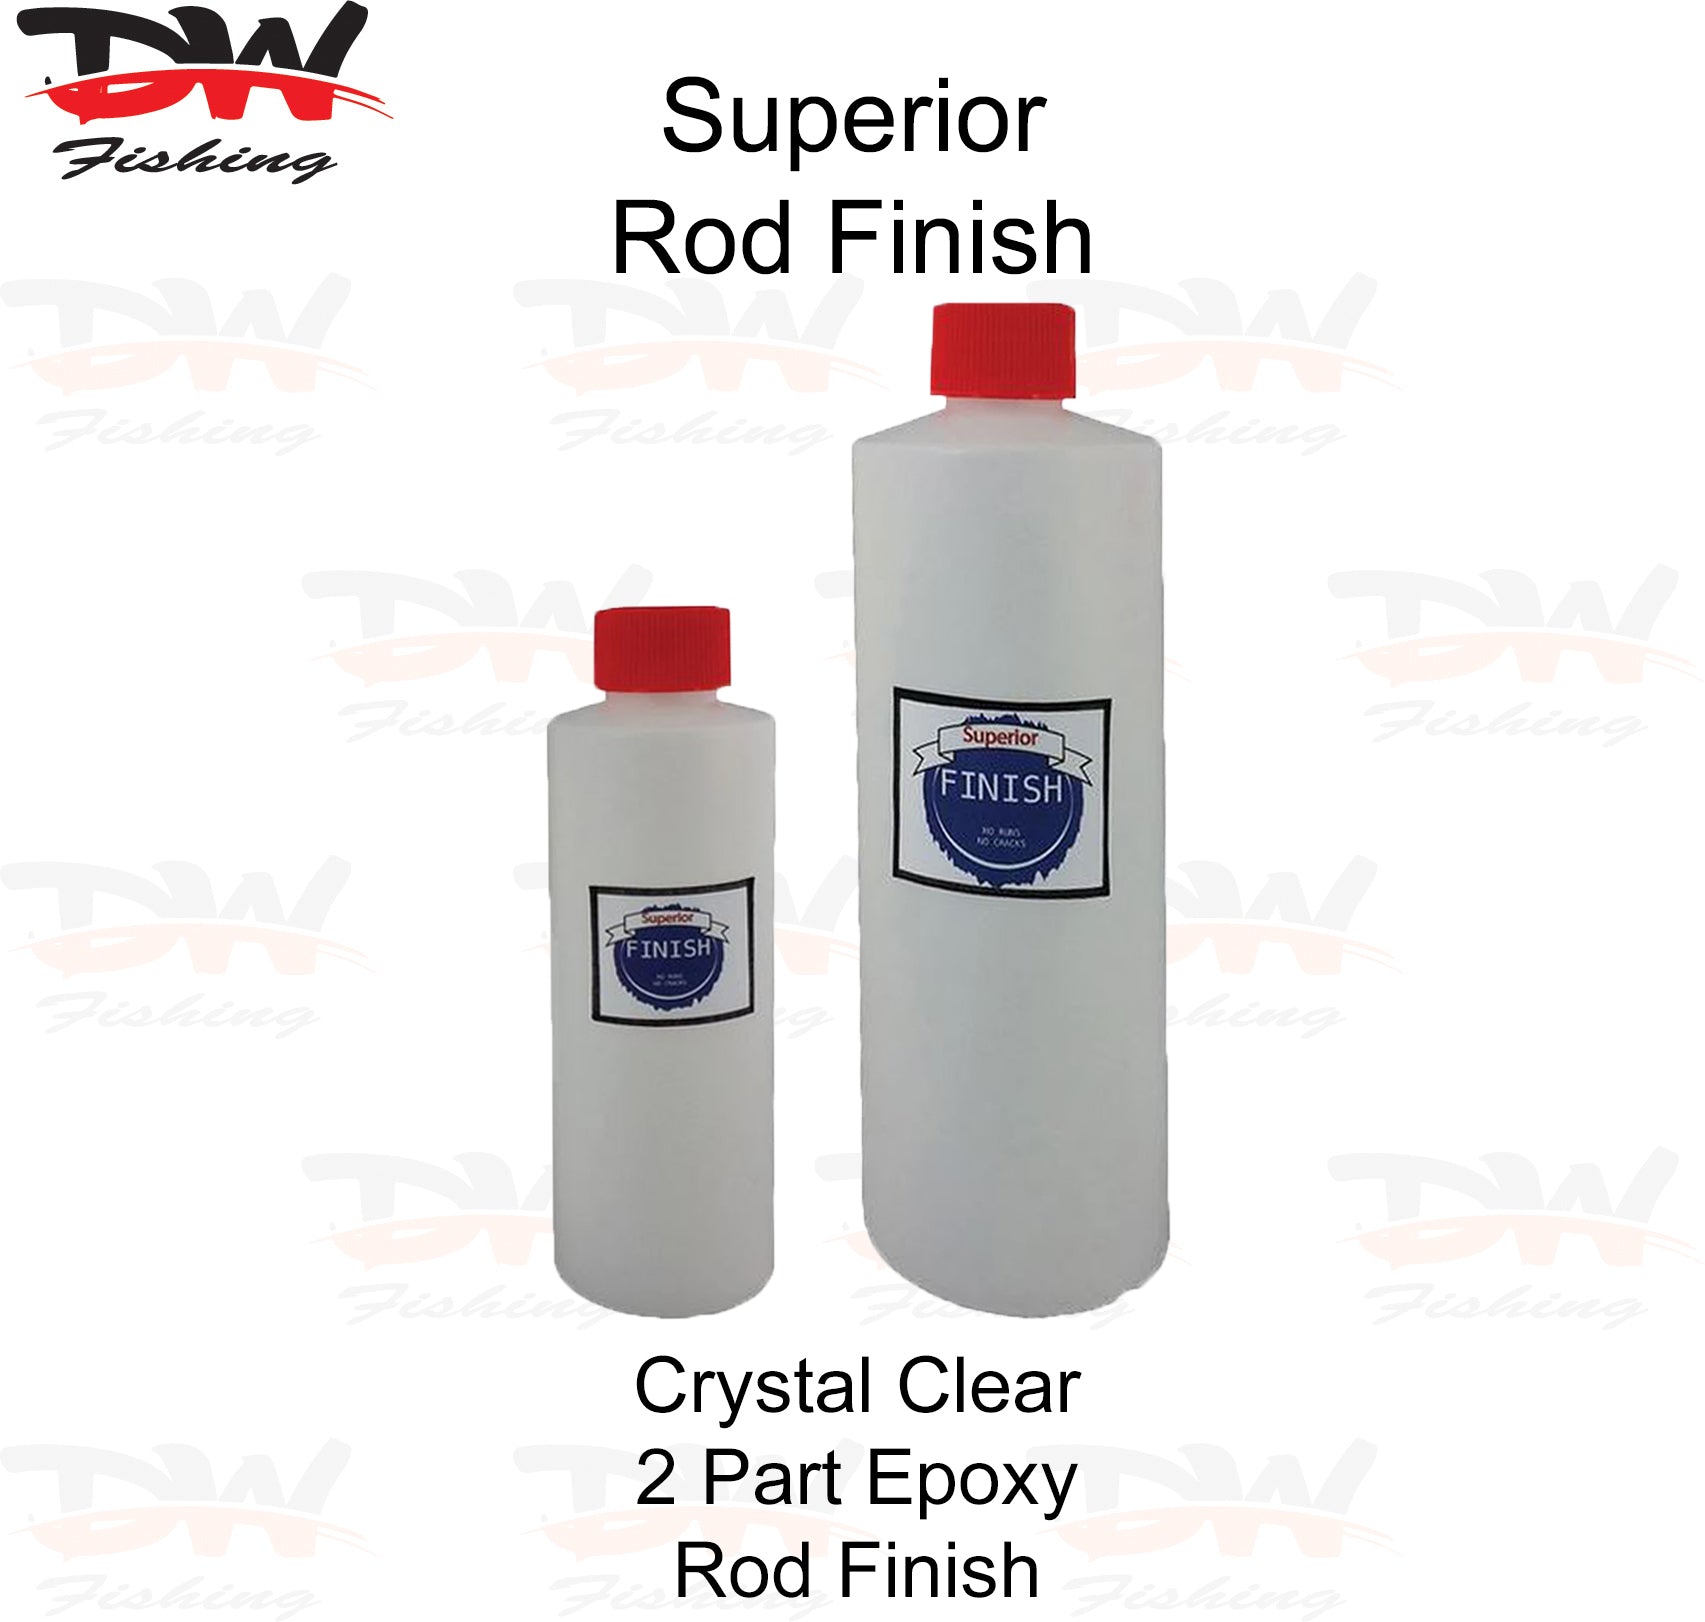 Superior crystal clear rod finish ultra clear epoxy resin